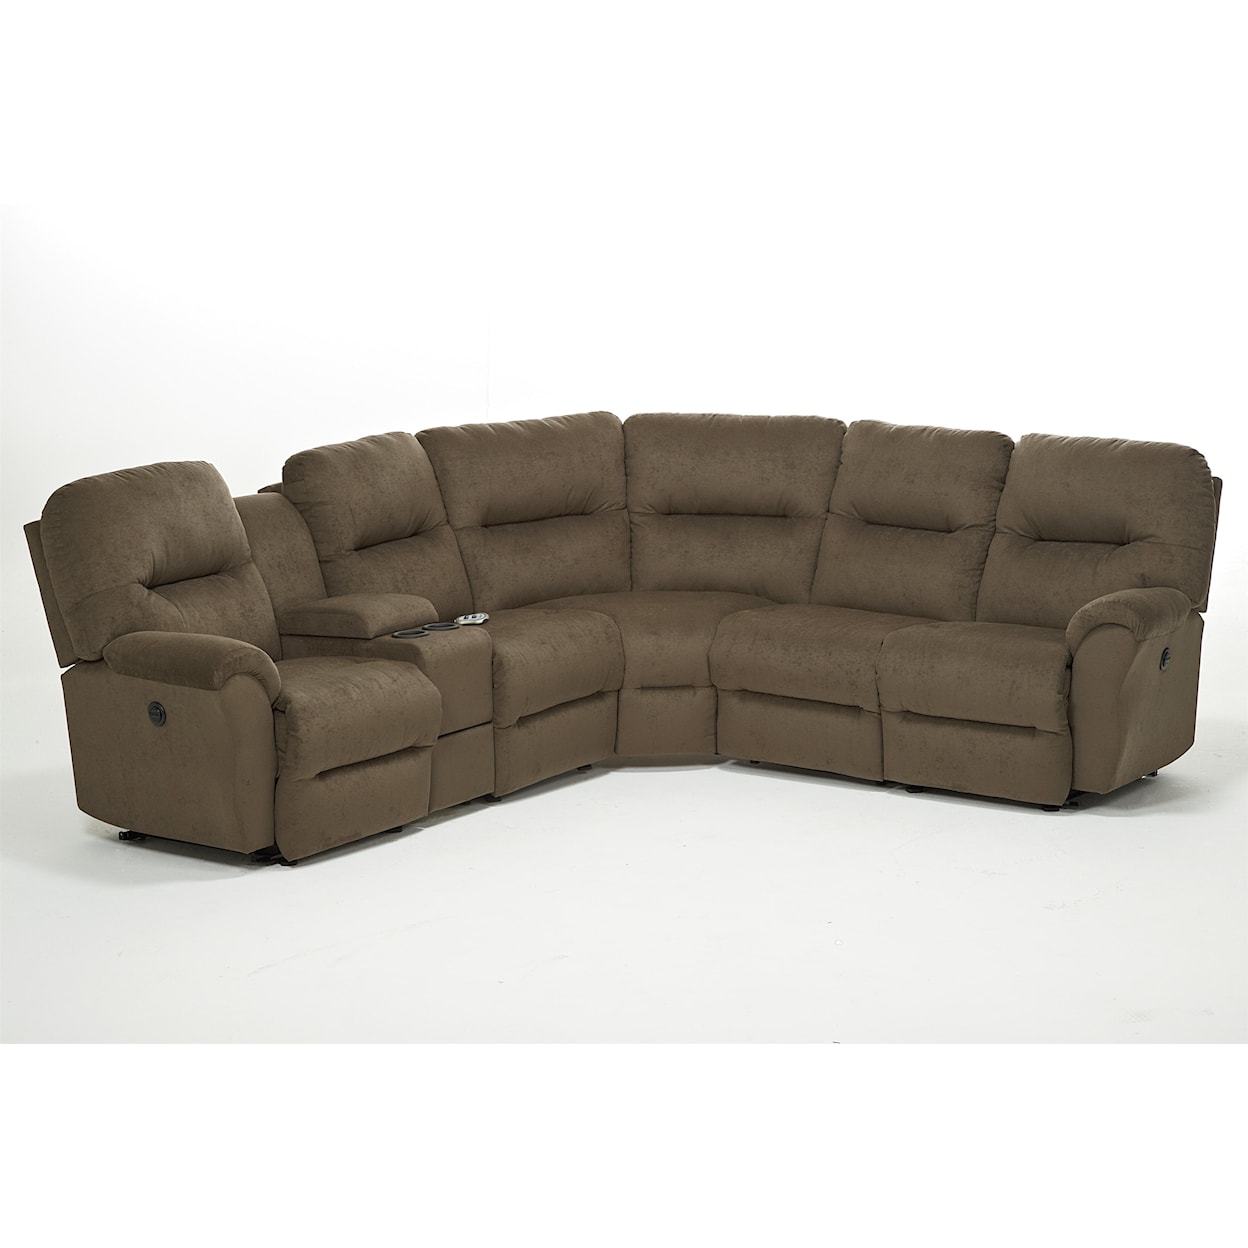 Best Home Furnishings Bodie 6 Pc Reclining Sectional Sofa